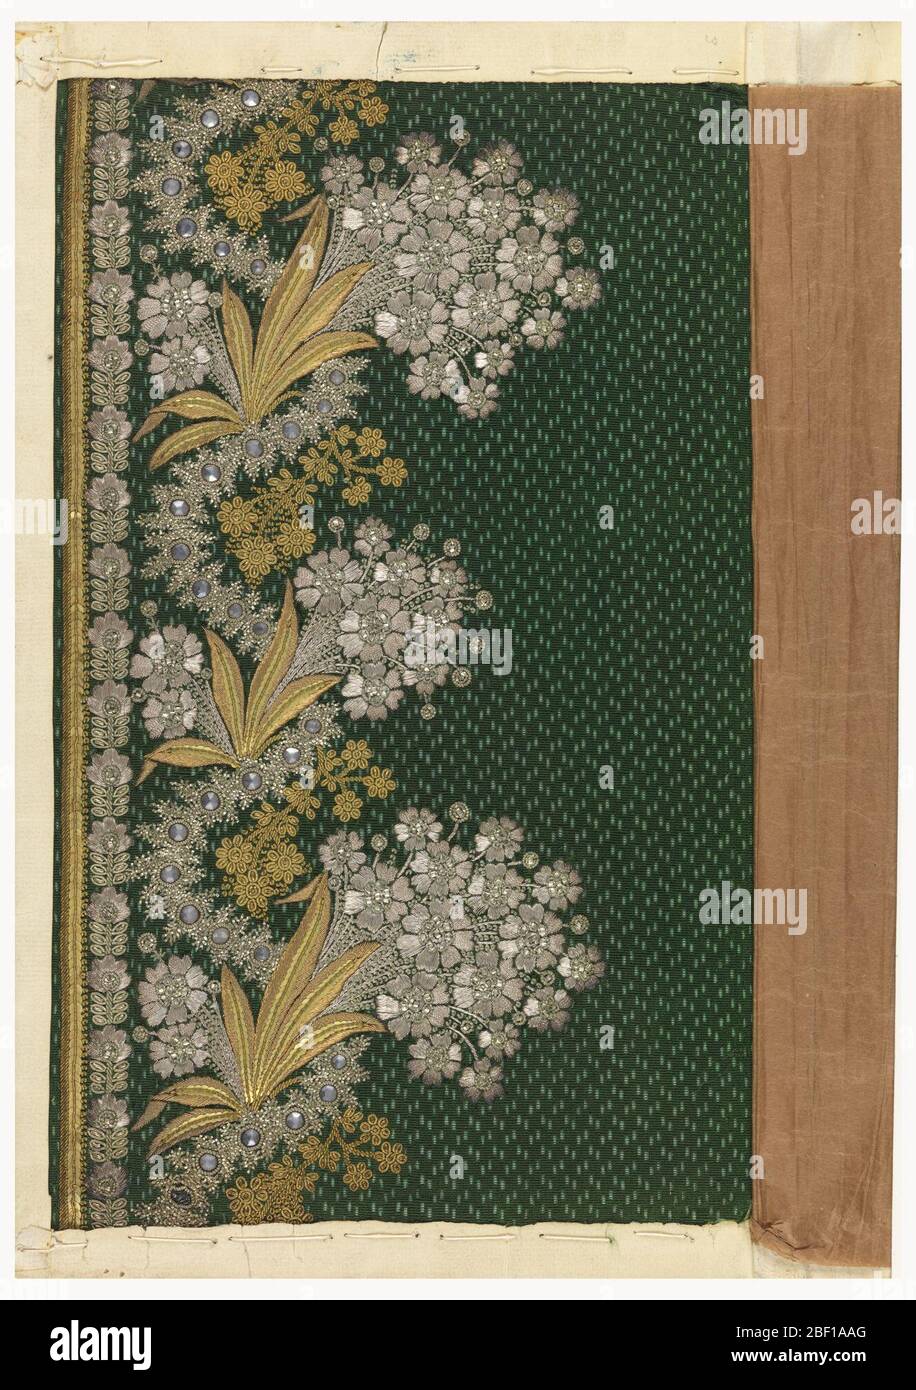 Embroidery sample. Floral design embroidered with silver and gold thread,  sequins and wire, and bits of glass on a patterned green ground Stock Photo  - Alamy